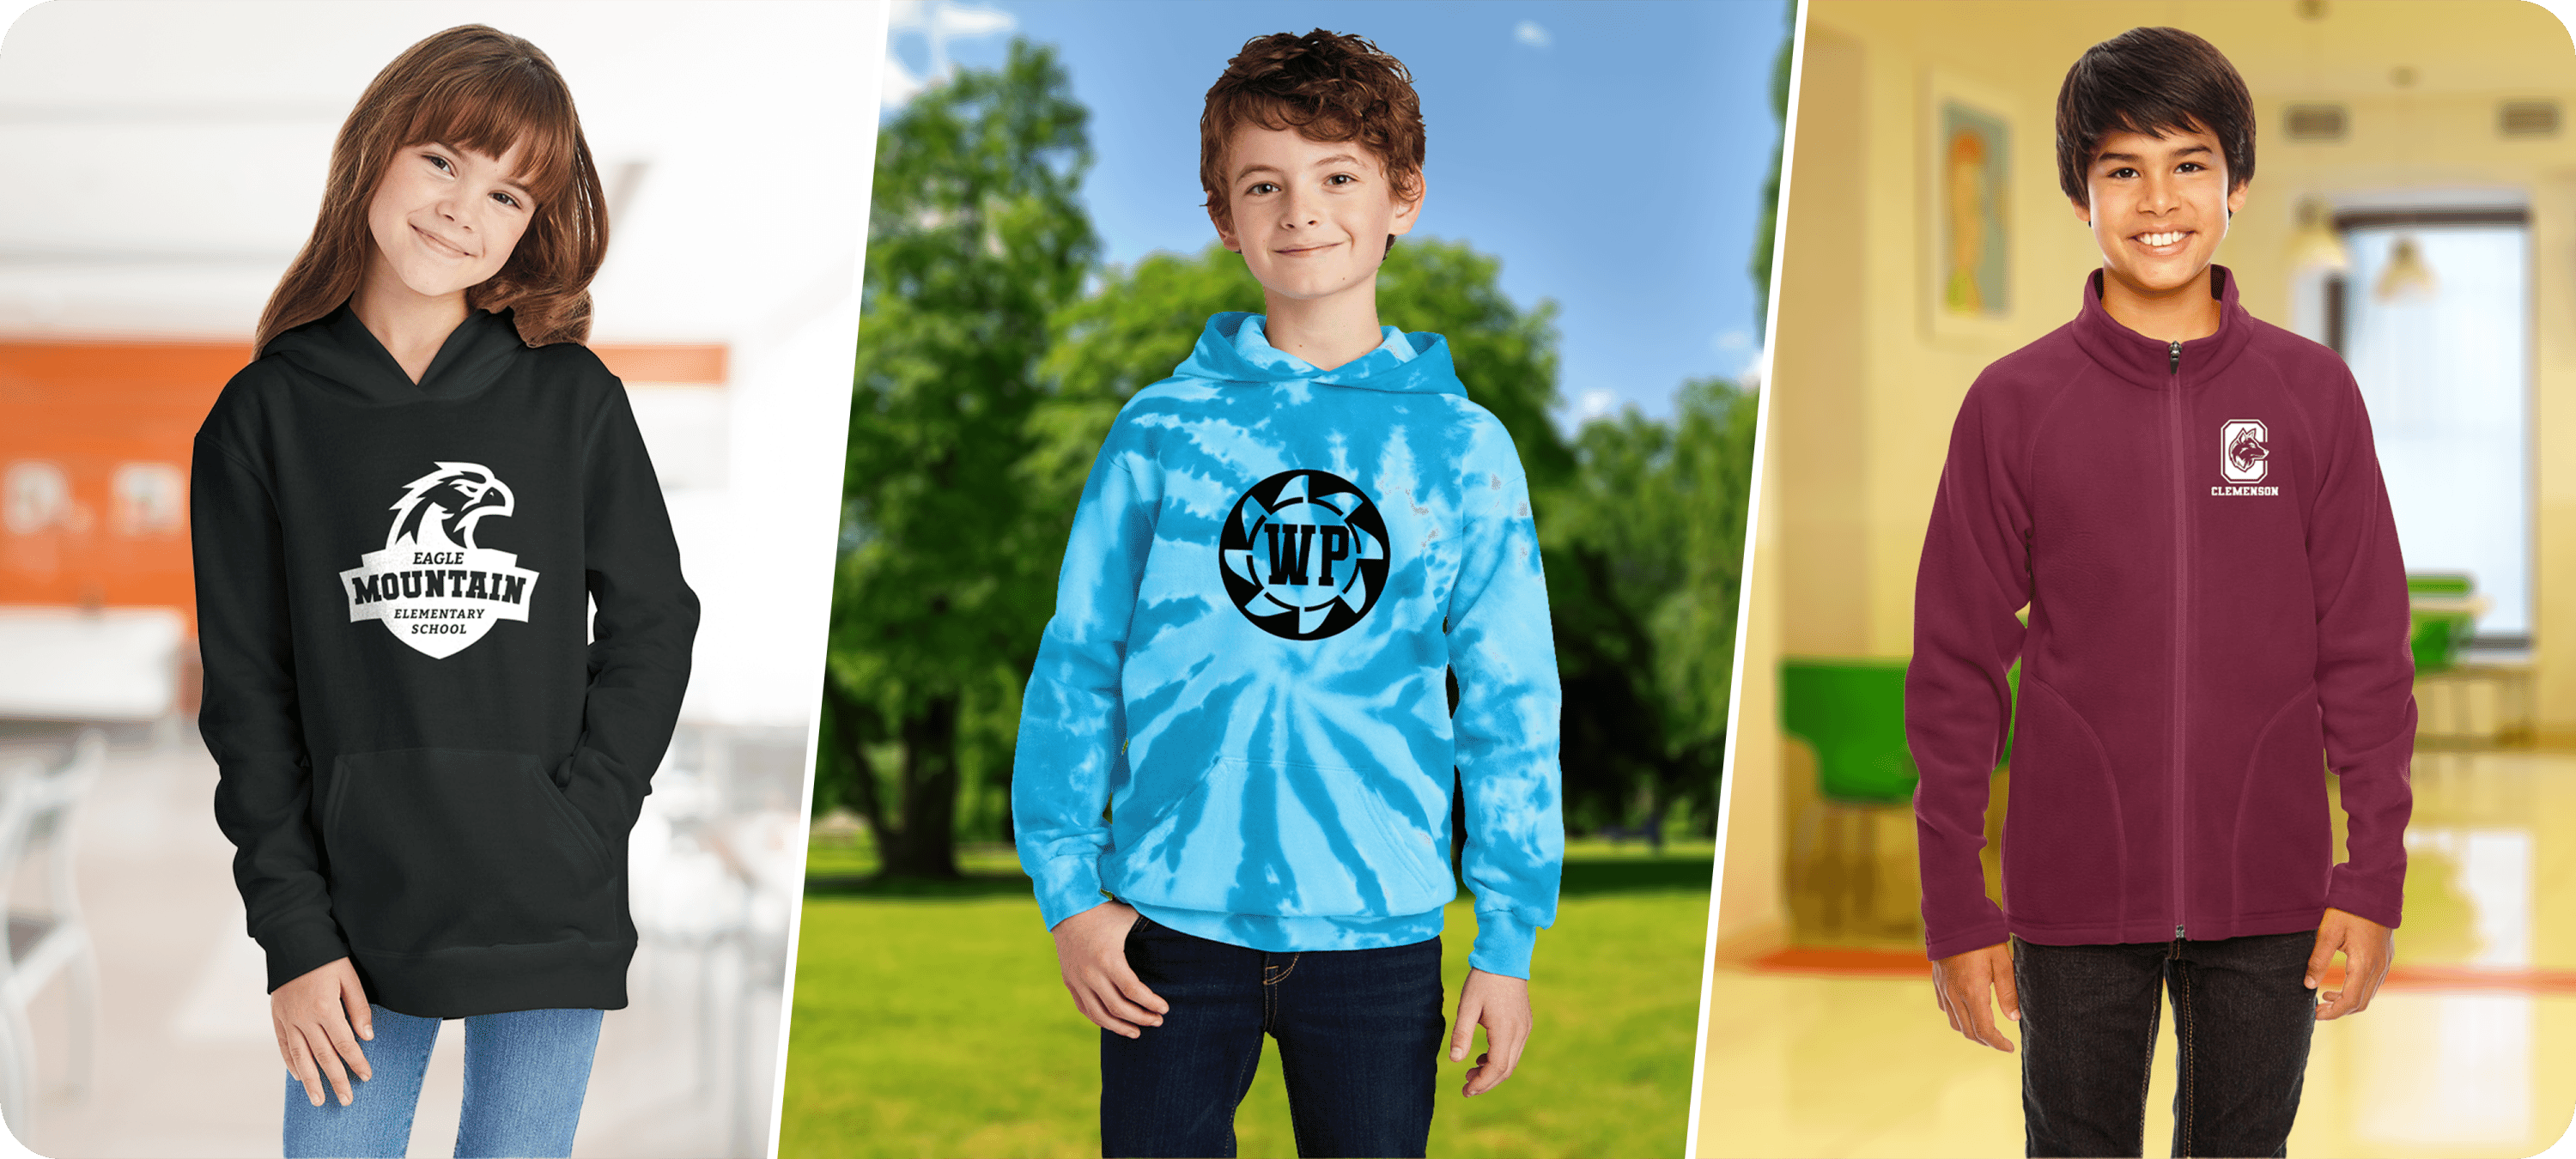 25 Spirit Wear Ideas for Elementary Schools, Ready for Your Logo or Mascot